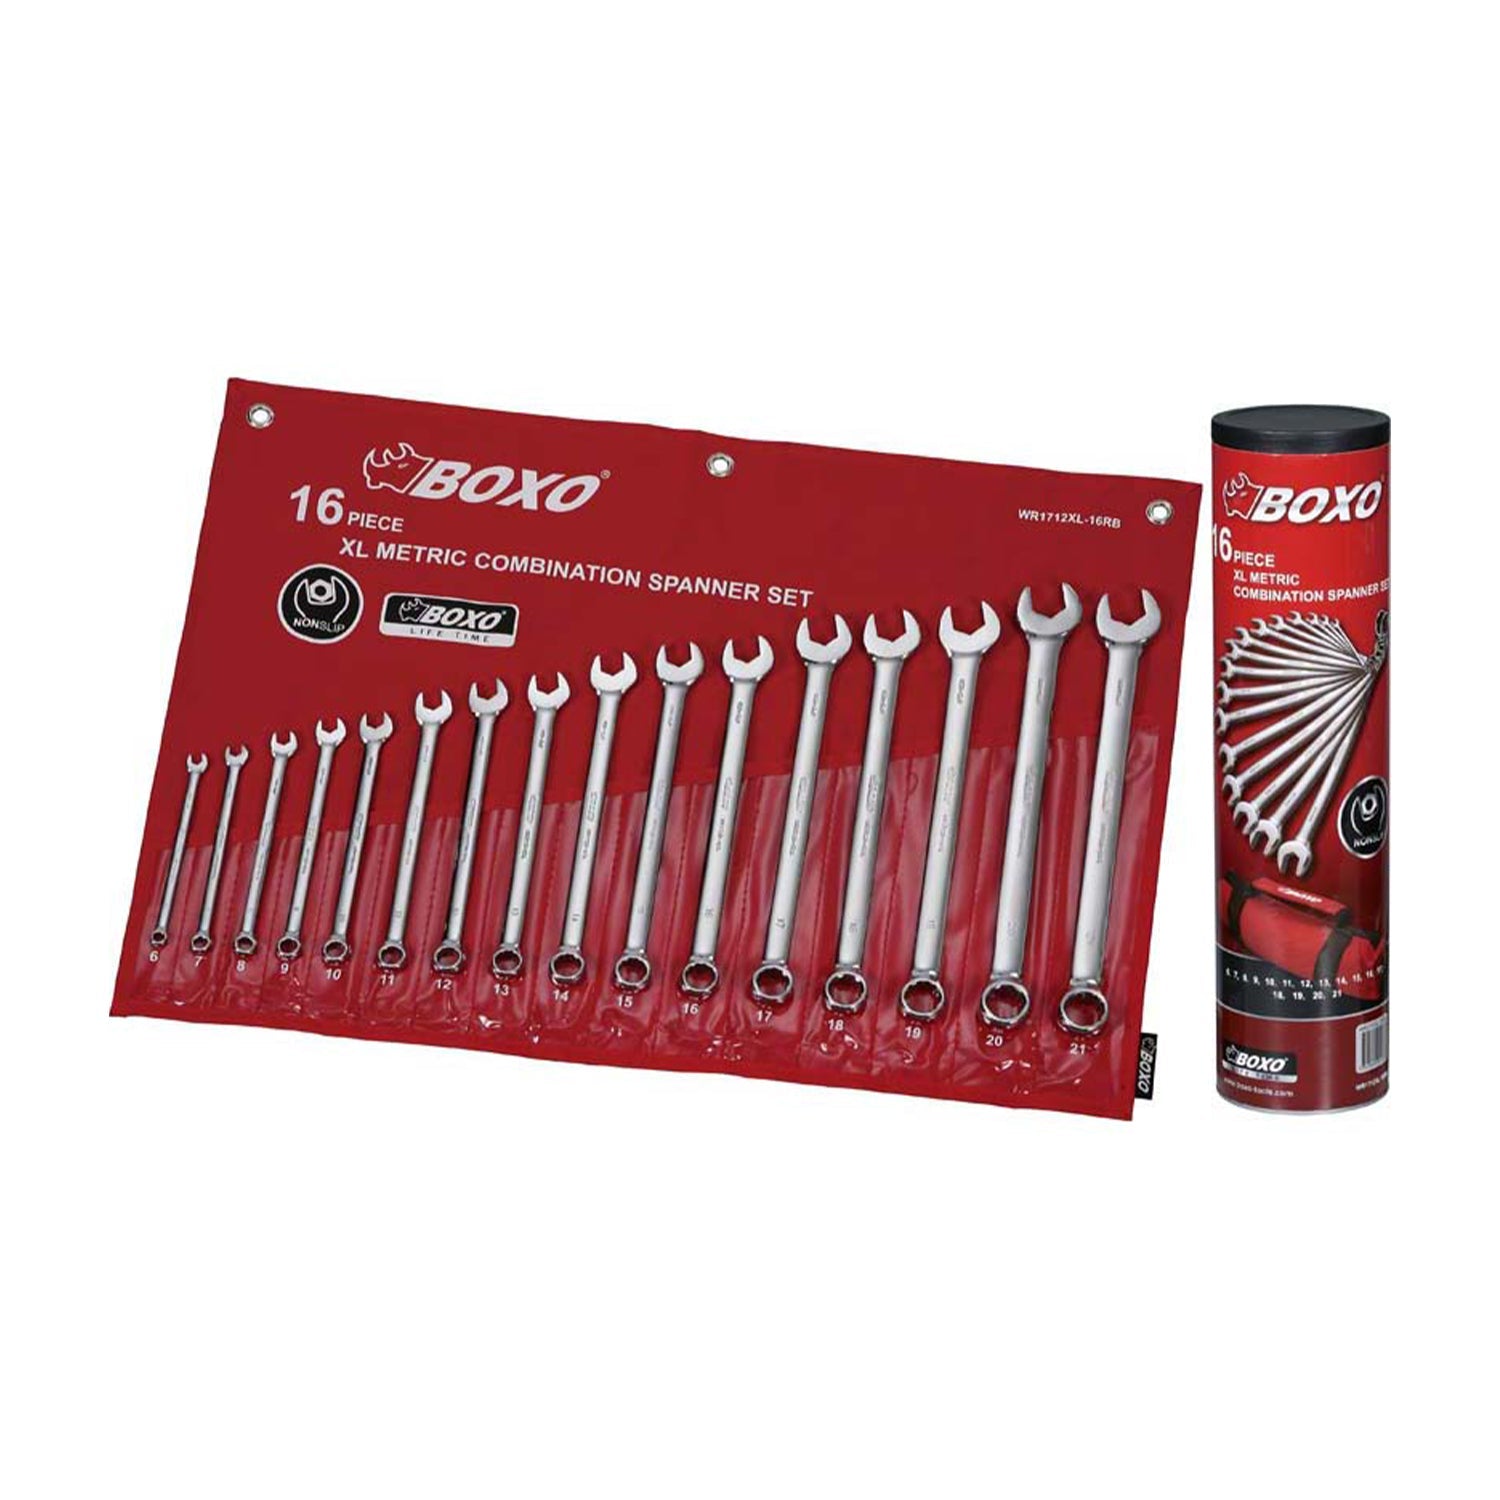 BOXO 16Pc XL Combination Spanner Set (6mm to 21mm)